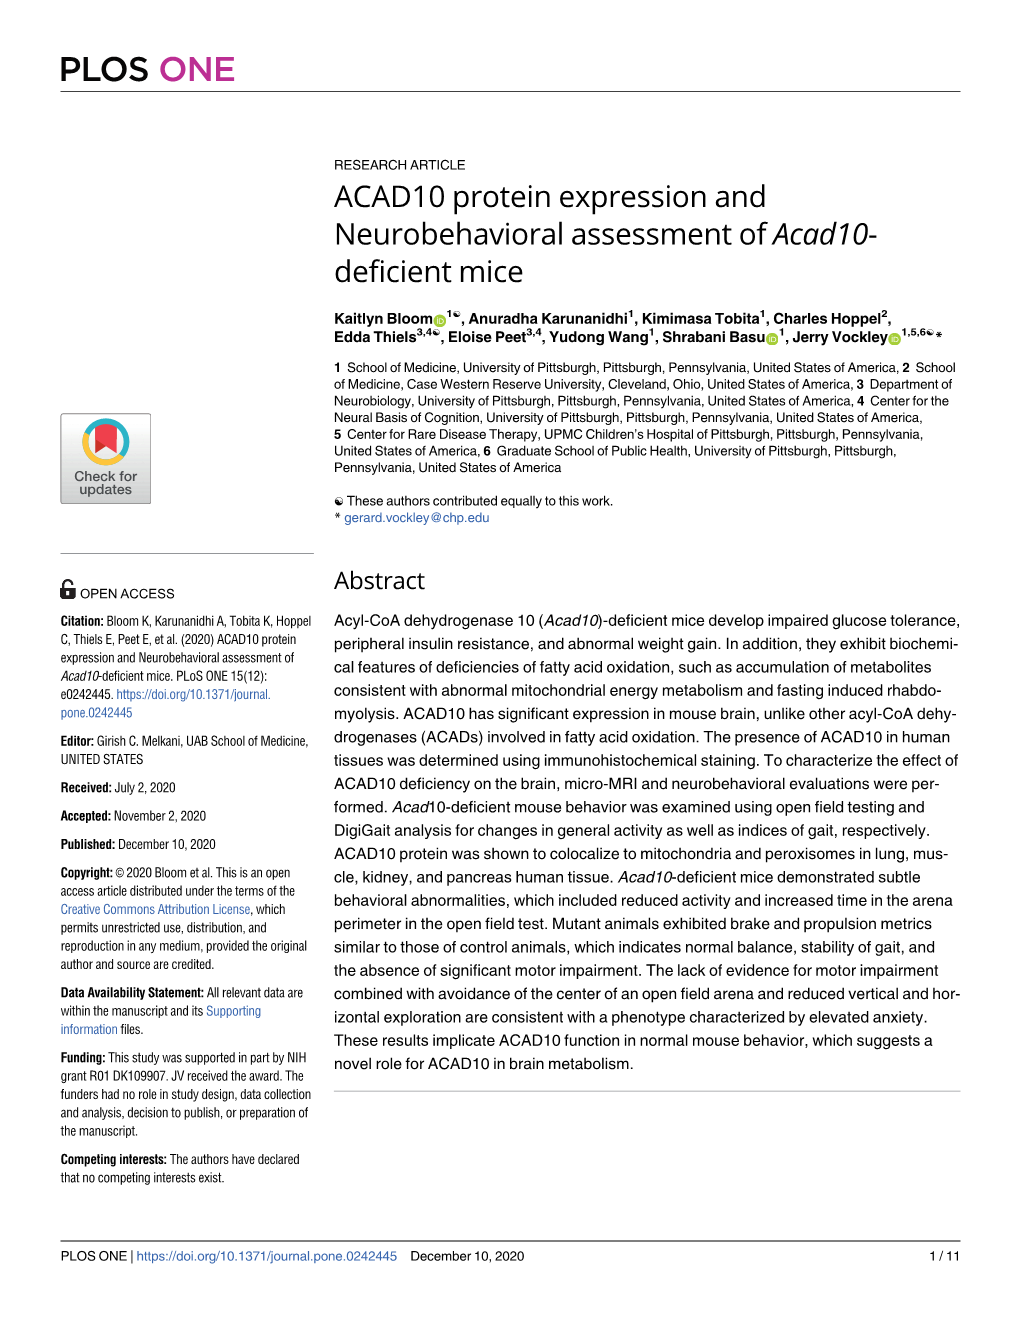 ACAD10 Protein Expression and Neurobehavioral Assessment of Acad10- Deficient Mice